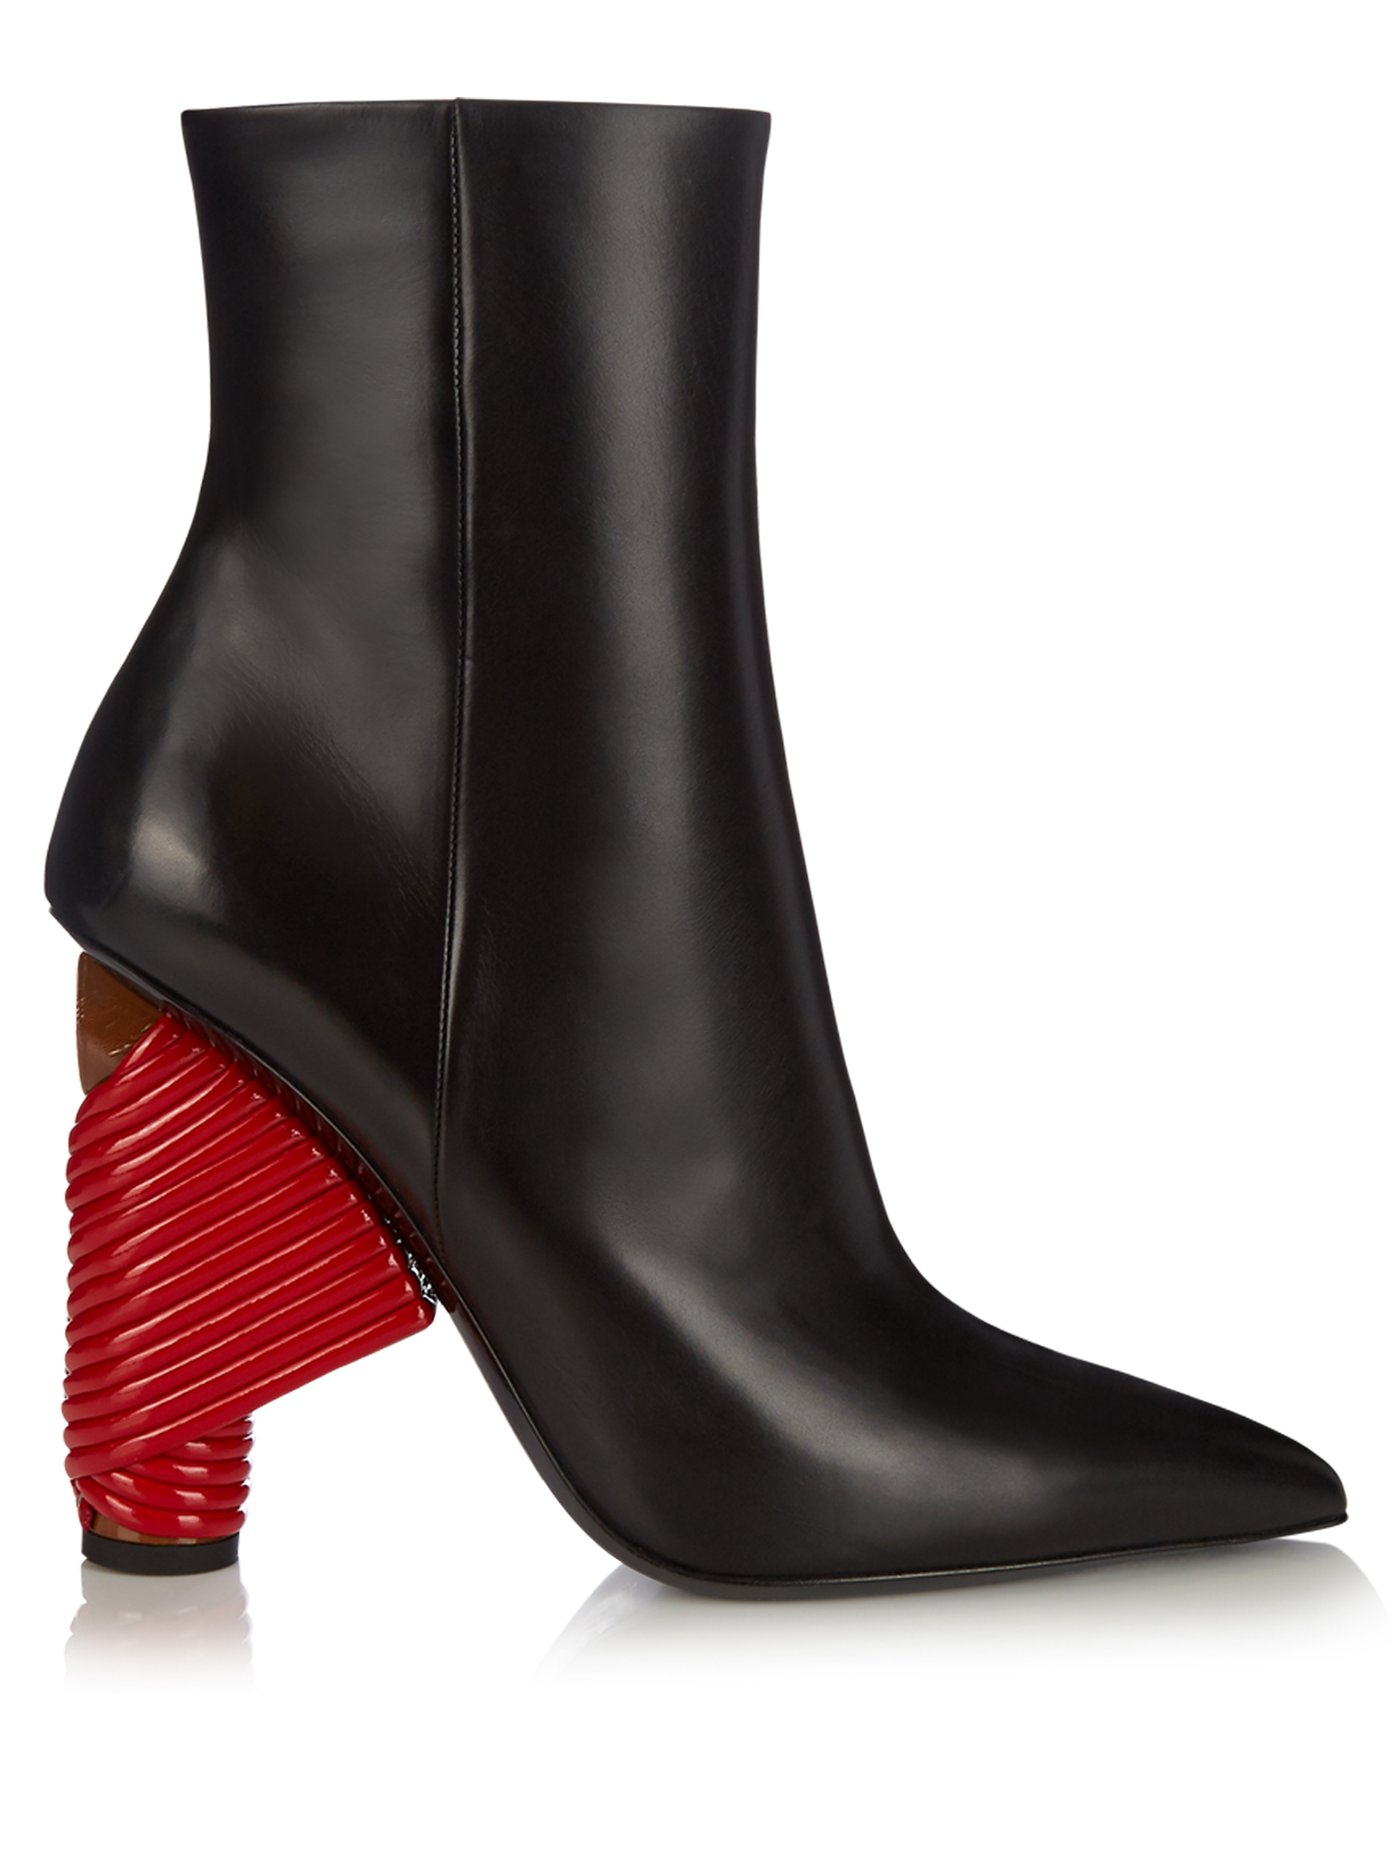 Bistrot leather boots | Balenciaga 